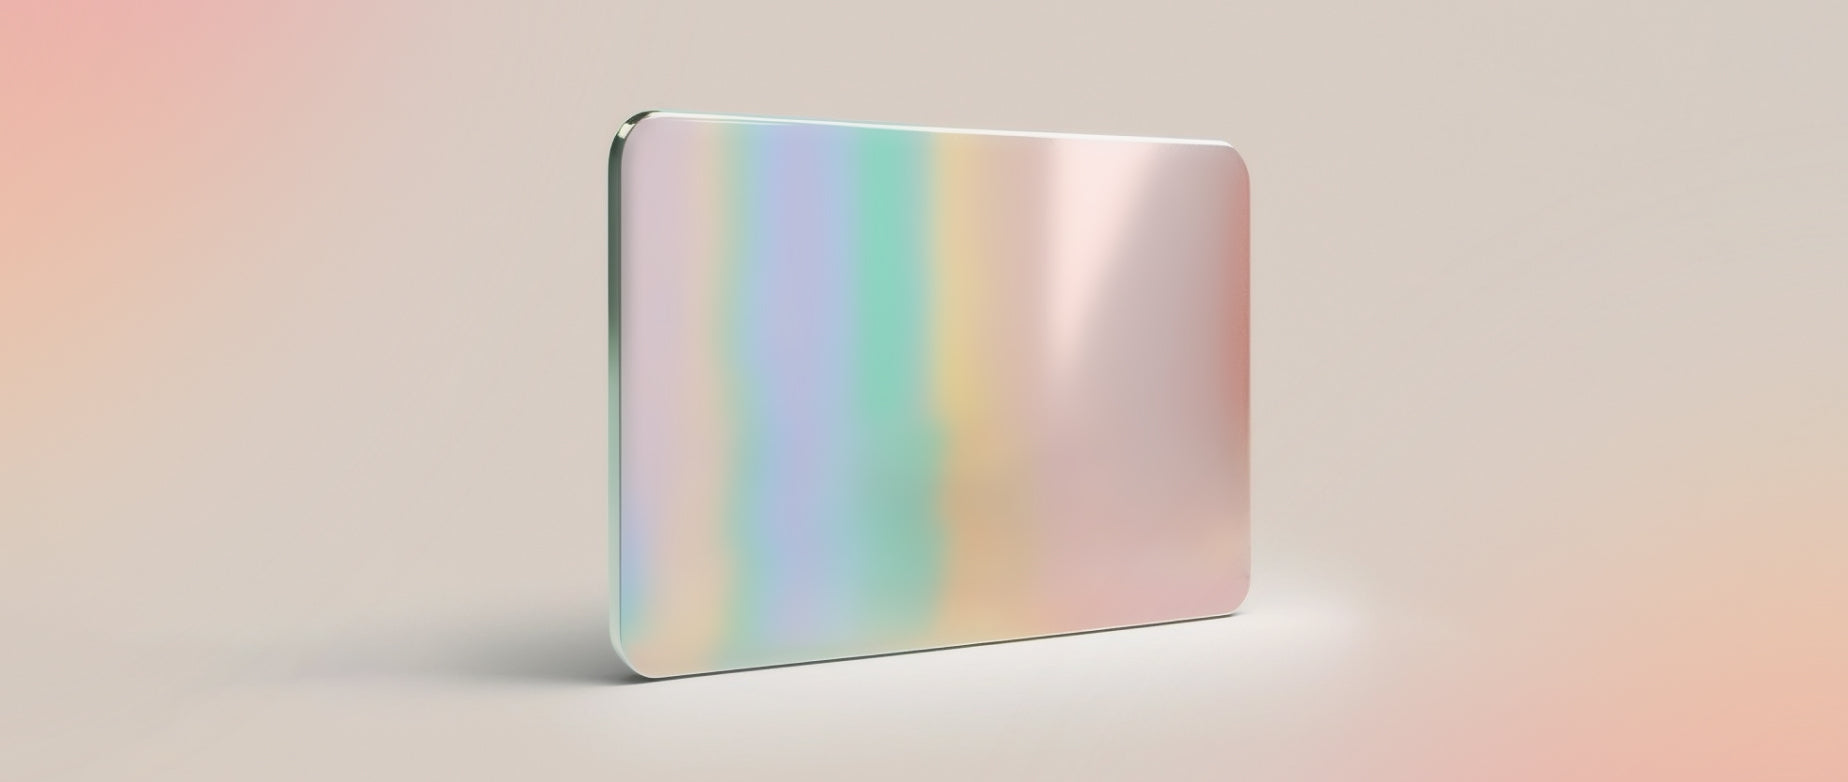 Holographic looking shape the size of a credit card